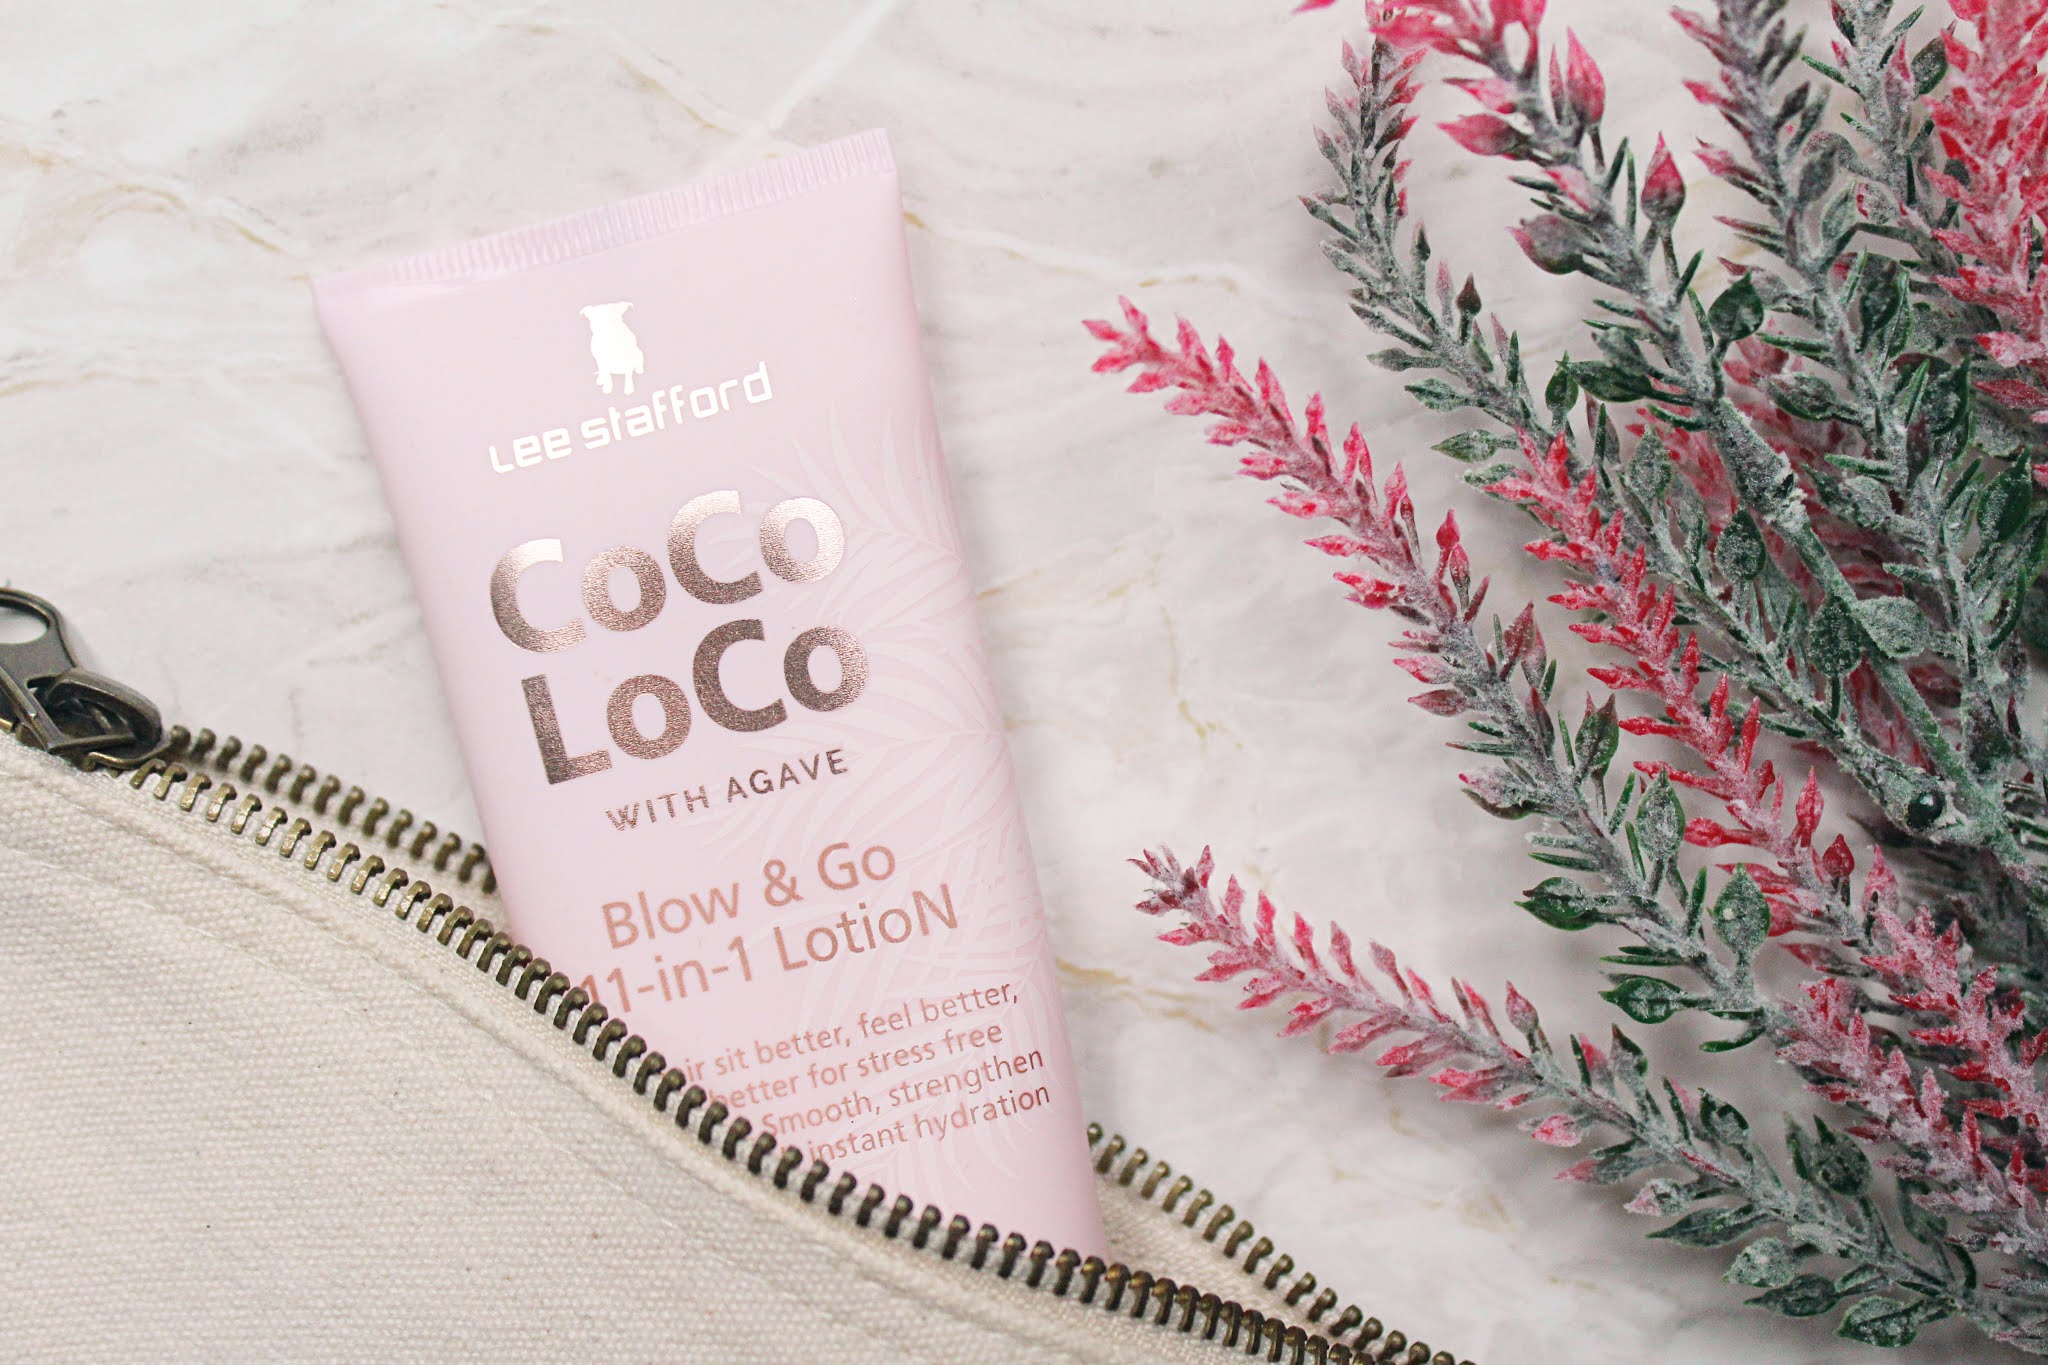 Lee Stafford Coco Loco with Agave Blow Dry Lotion Review